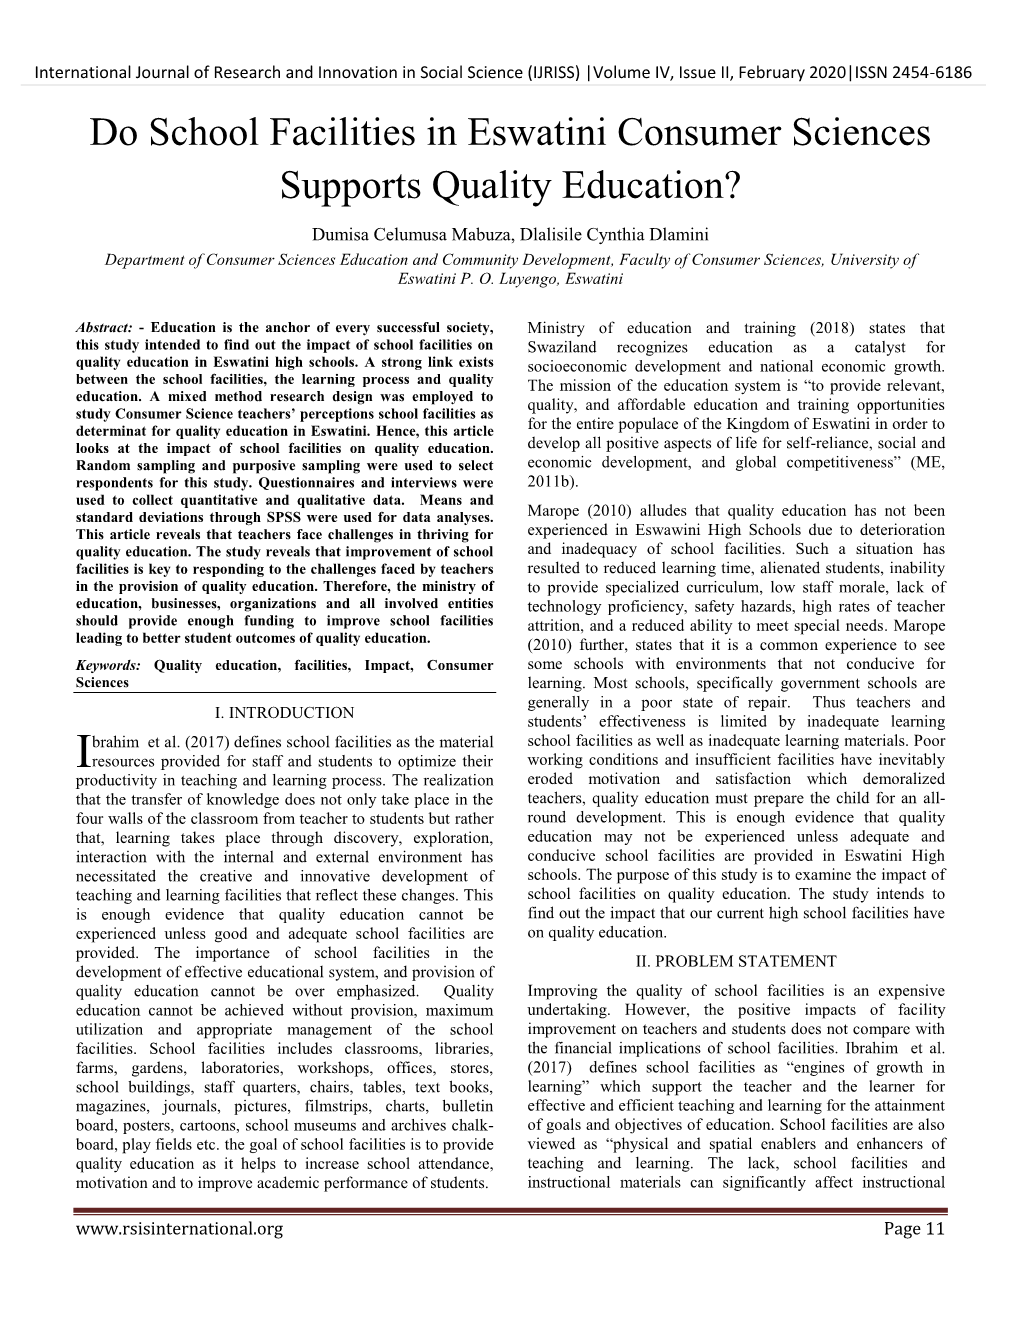 Do School Facilities in Eswatini Consumer Sciences Supports Quality Education?